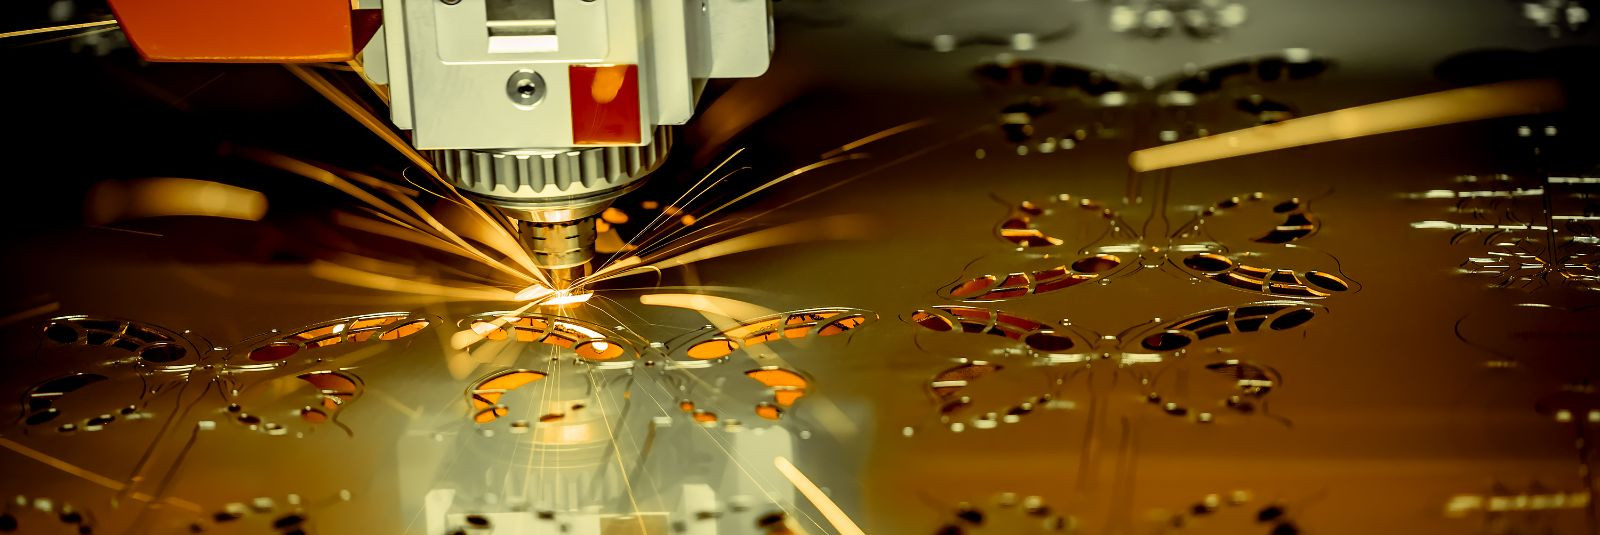 When it comes to sheet metal fabrication, precision and efficiency are key. That's why RGR Airon OÜ offers oxy-fuel CNC cutting technology to revolutionize the 